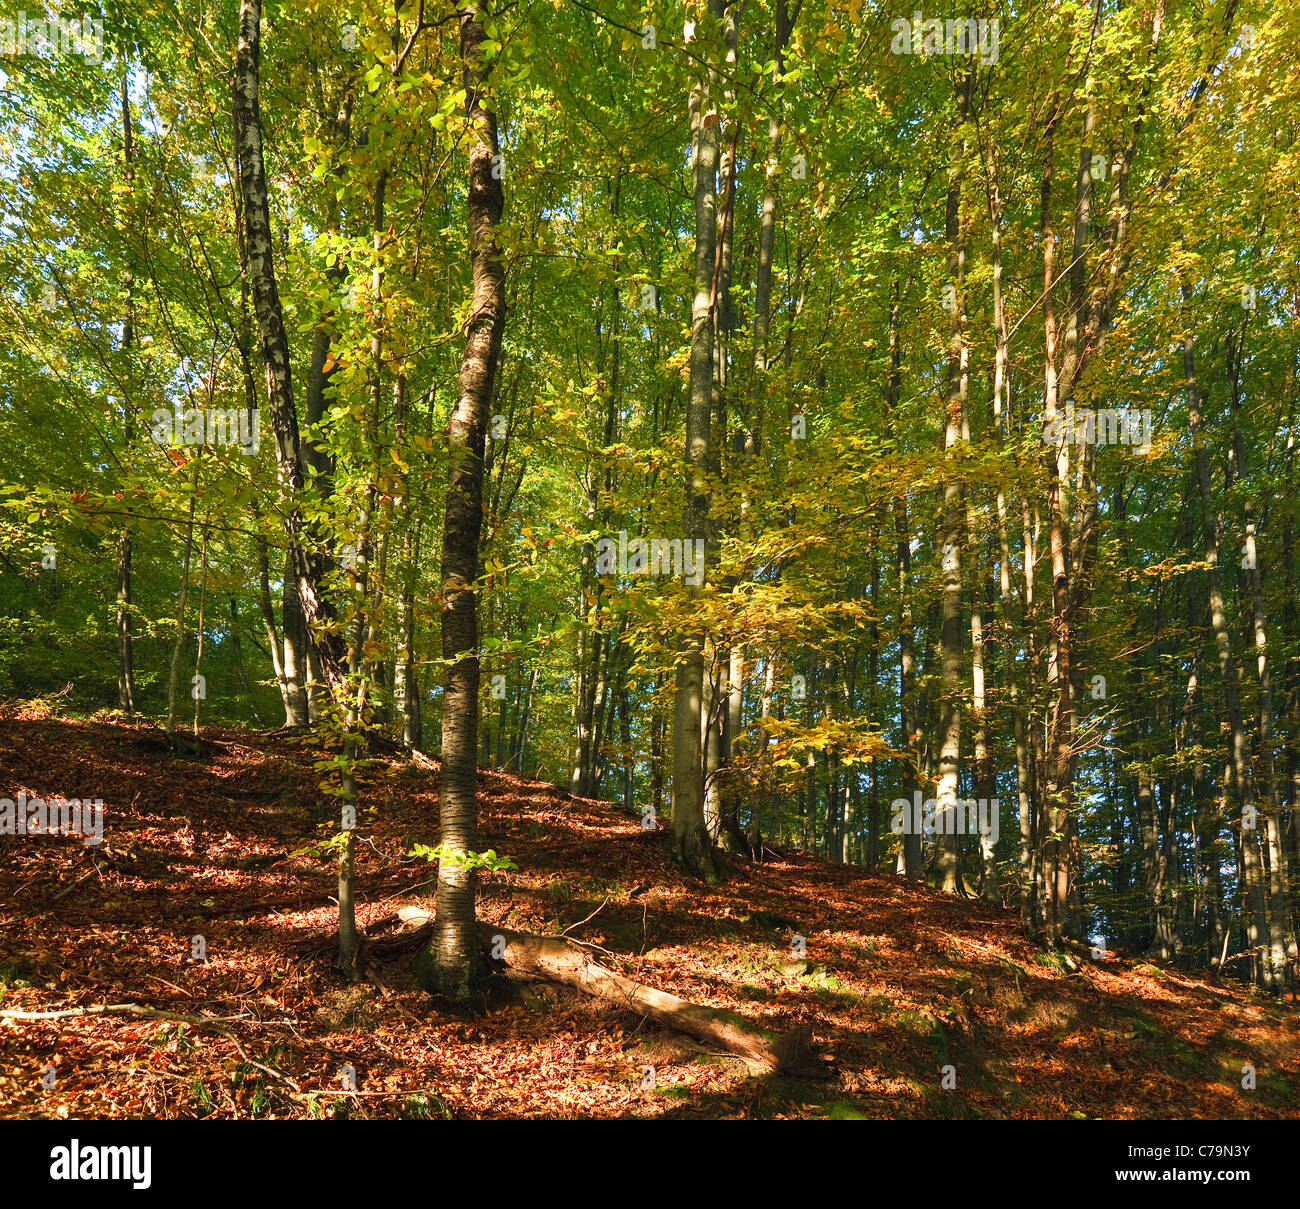 First autumn yellow foliage in sunny mountain beech forest Stock Photo